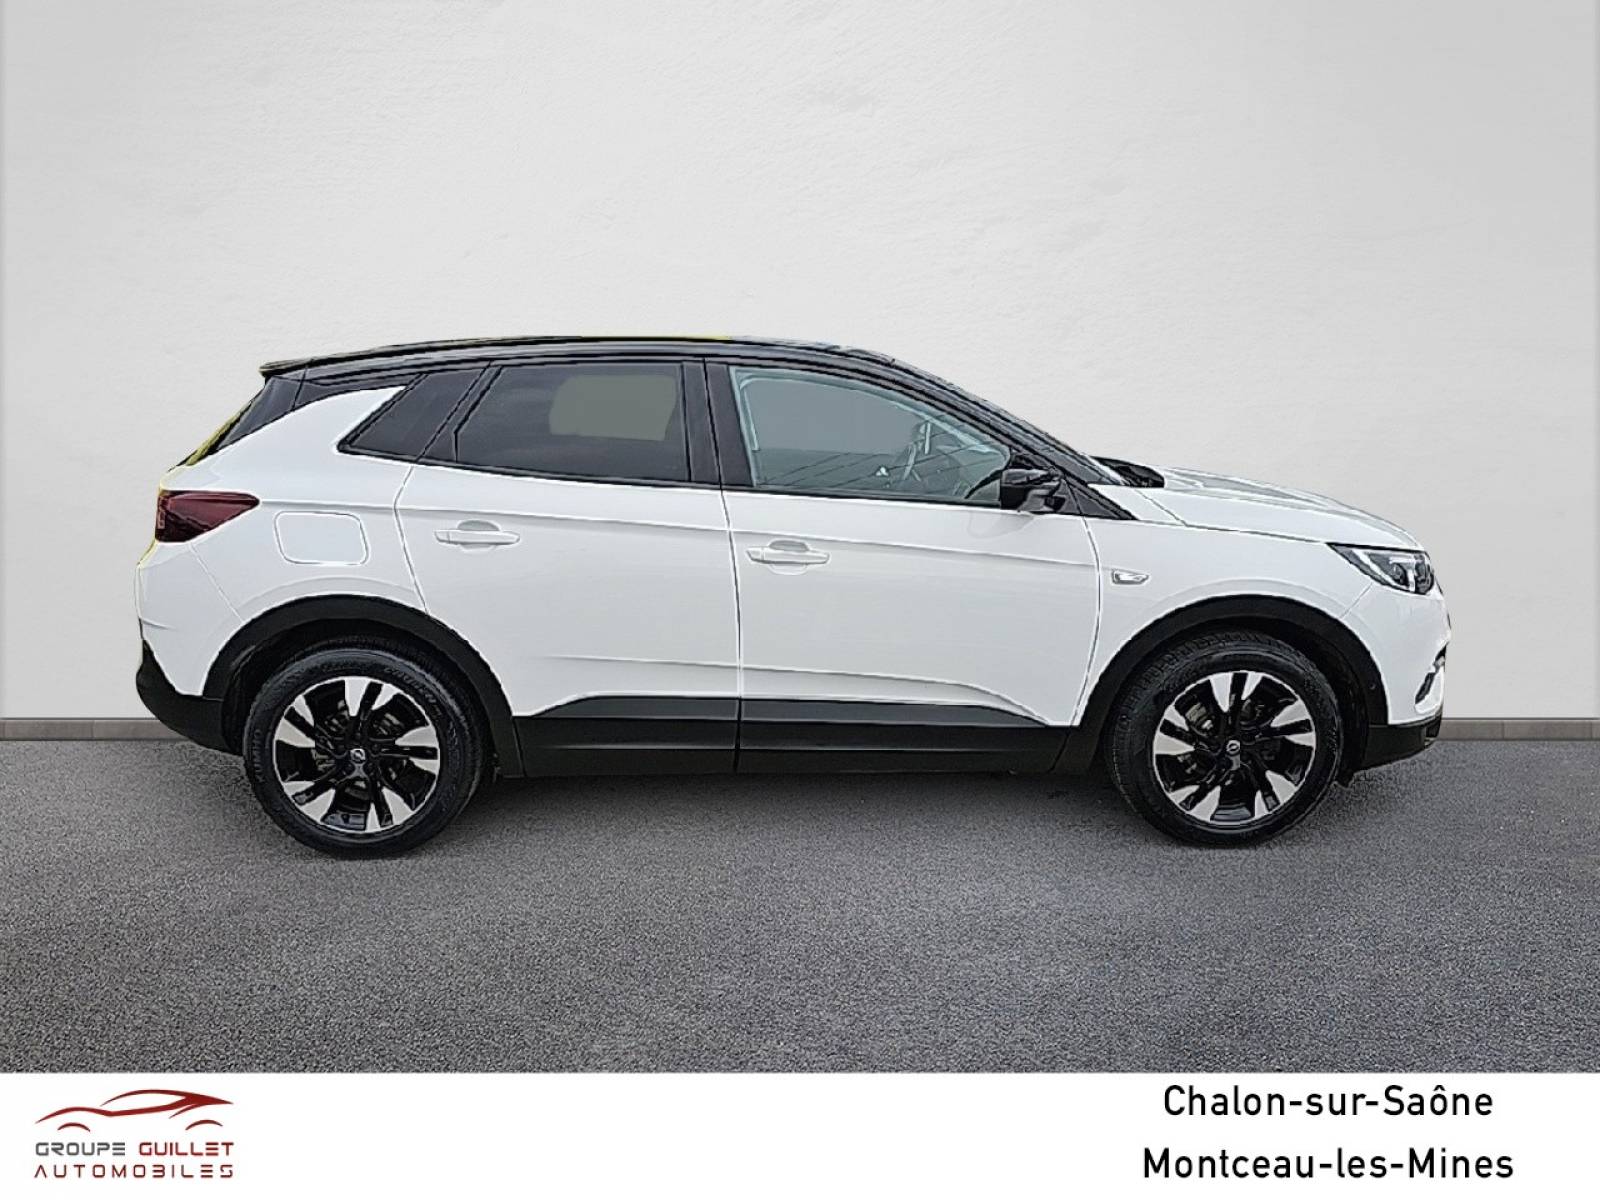 OPEL Grandland X 1.2 Turbo 130 ch - véhicule d'occasion - Groupe Guillet - Opel Magicauto Chalon - 71380 - Saint-Marcel - 4